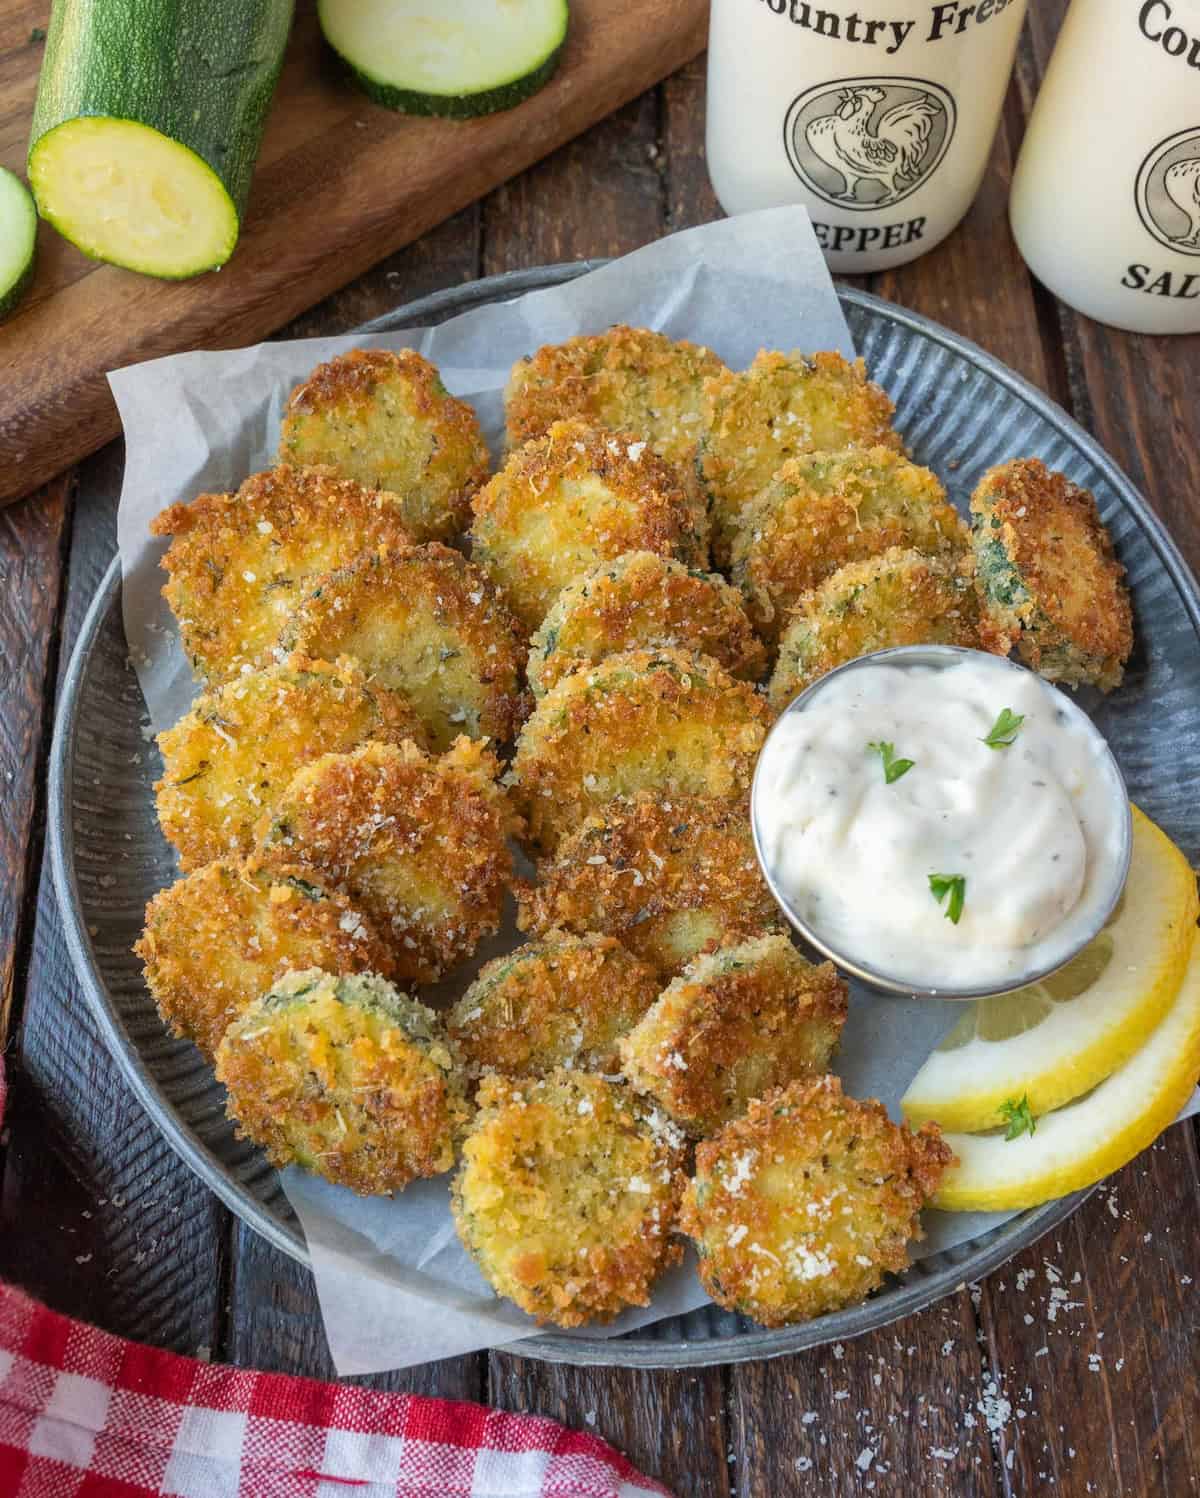 zucchini crisps on a plate with ranch dip.